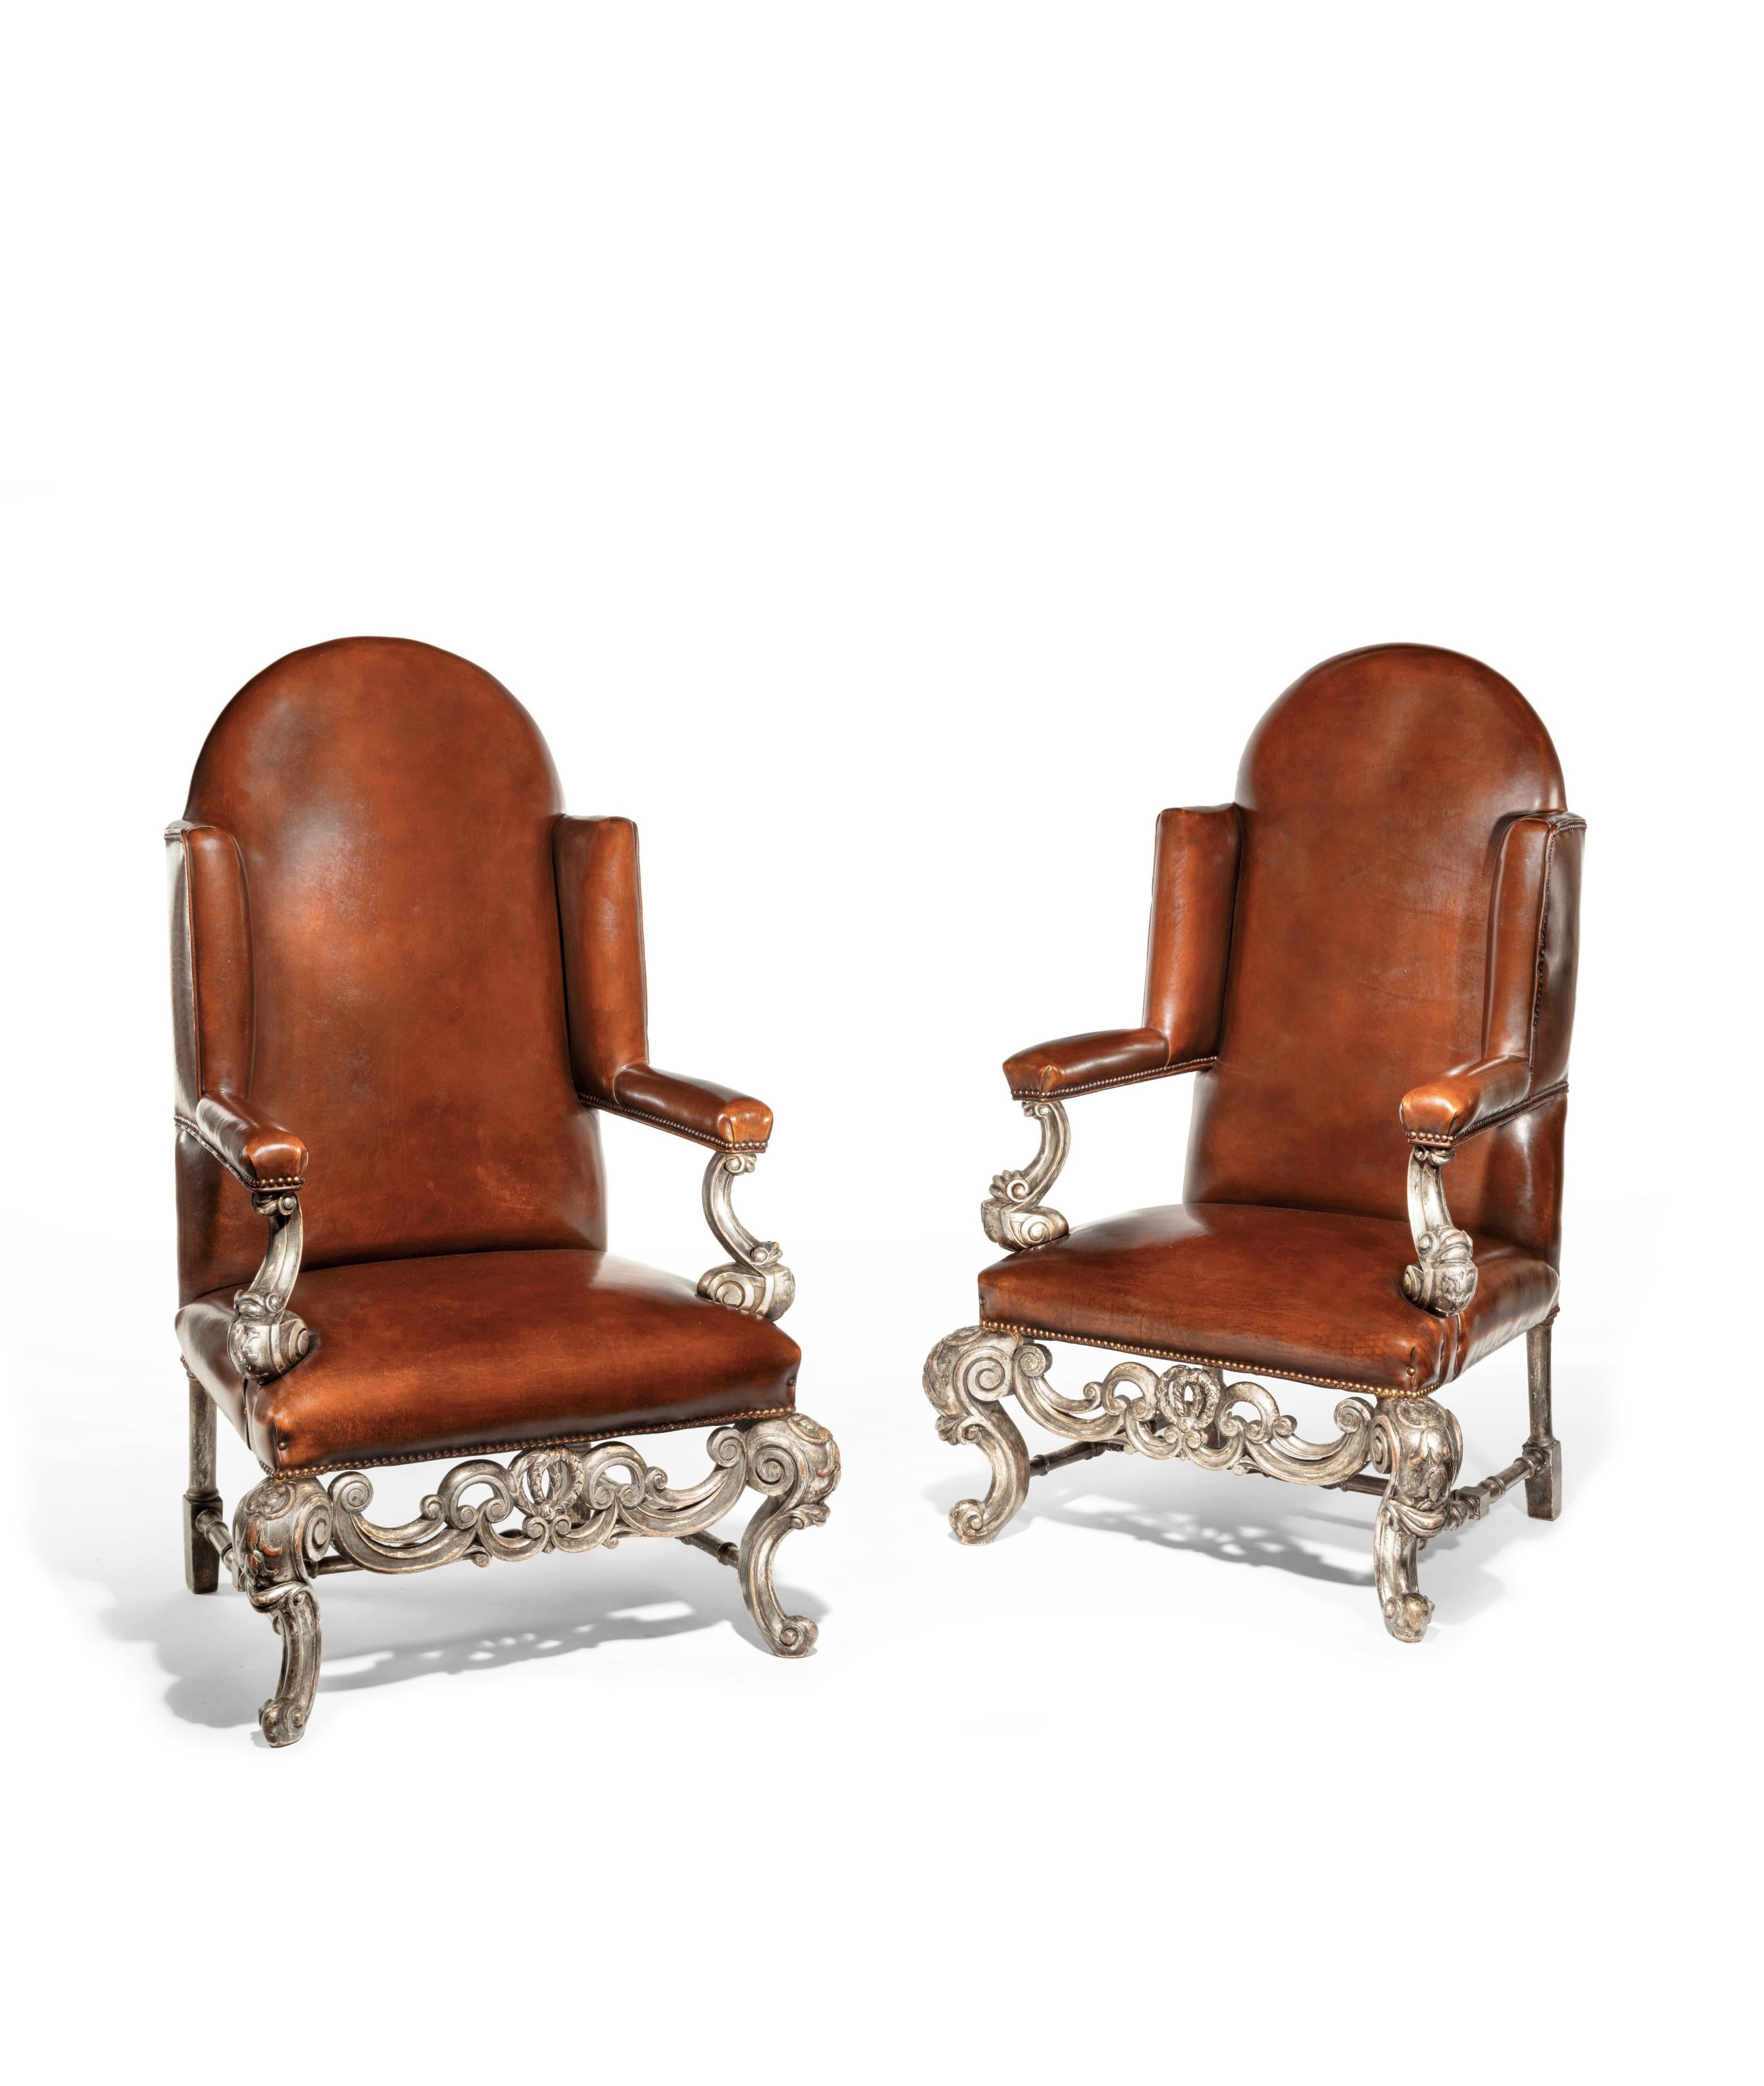 Antique Pair of Silver Gilt Leather Upholstered Wing Chairs 2